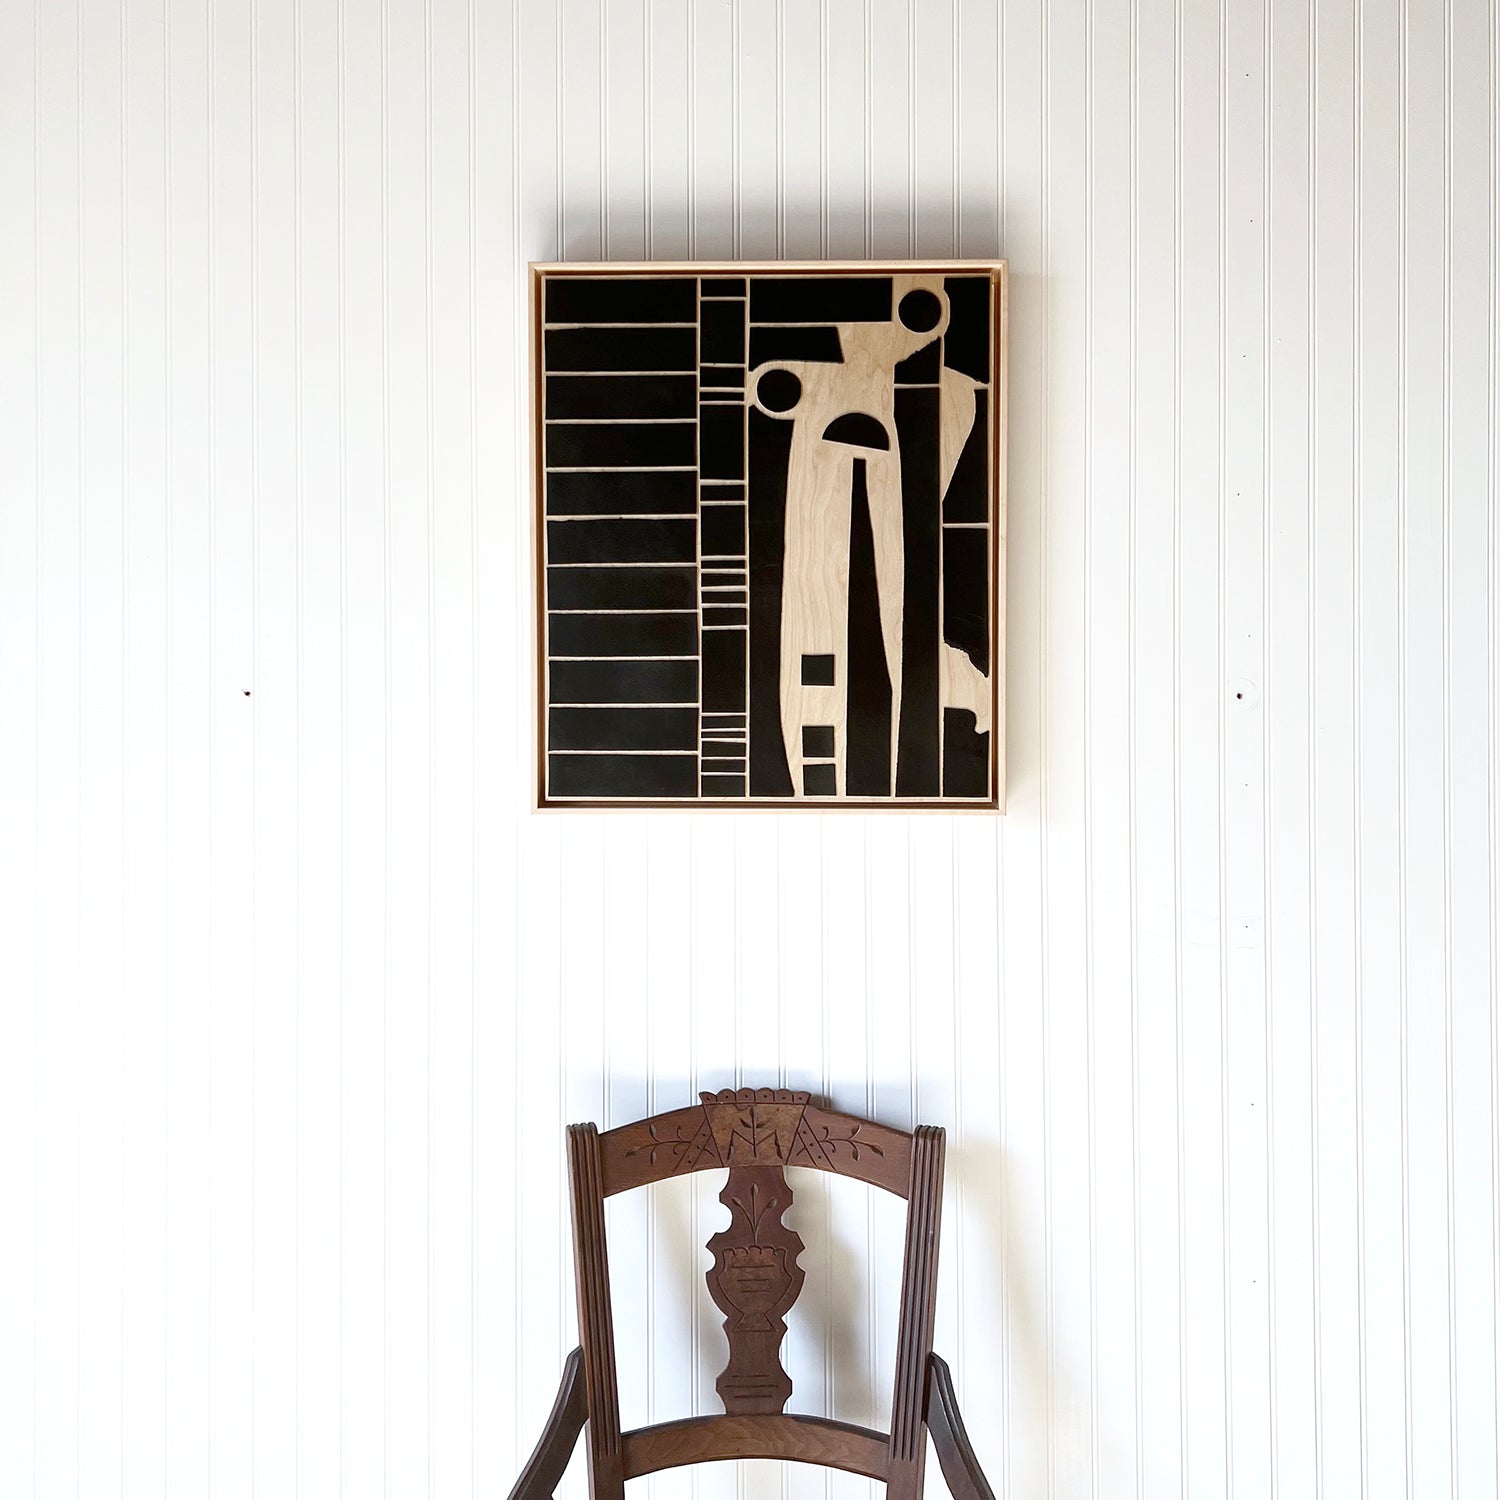 Abstract art made from Black leather on Wood by Los Angeles artist Angie Johnson hangs on a white wall above a wood chair